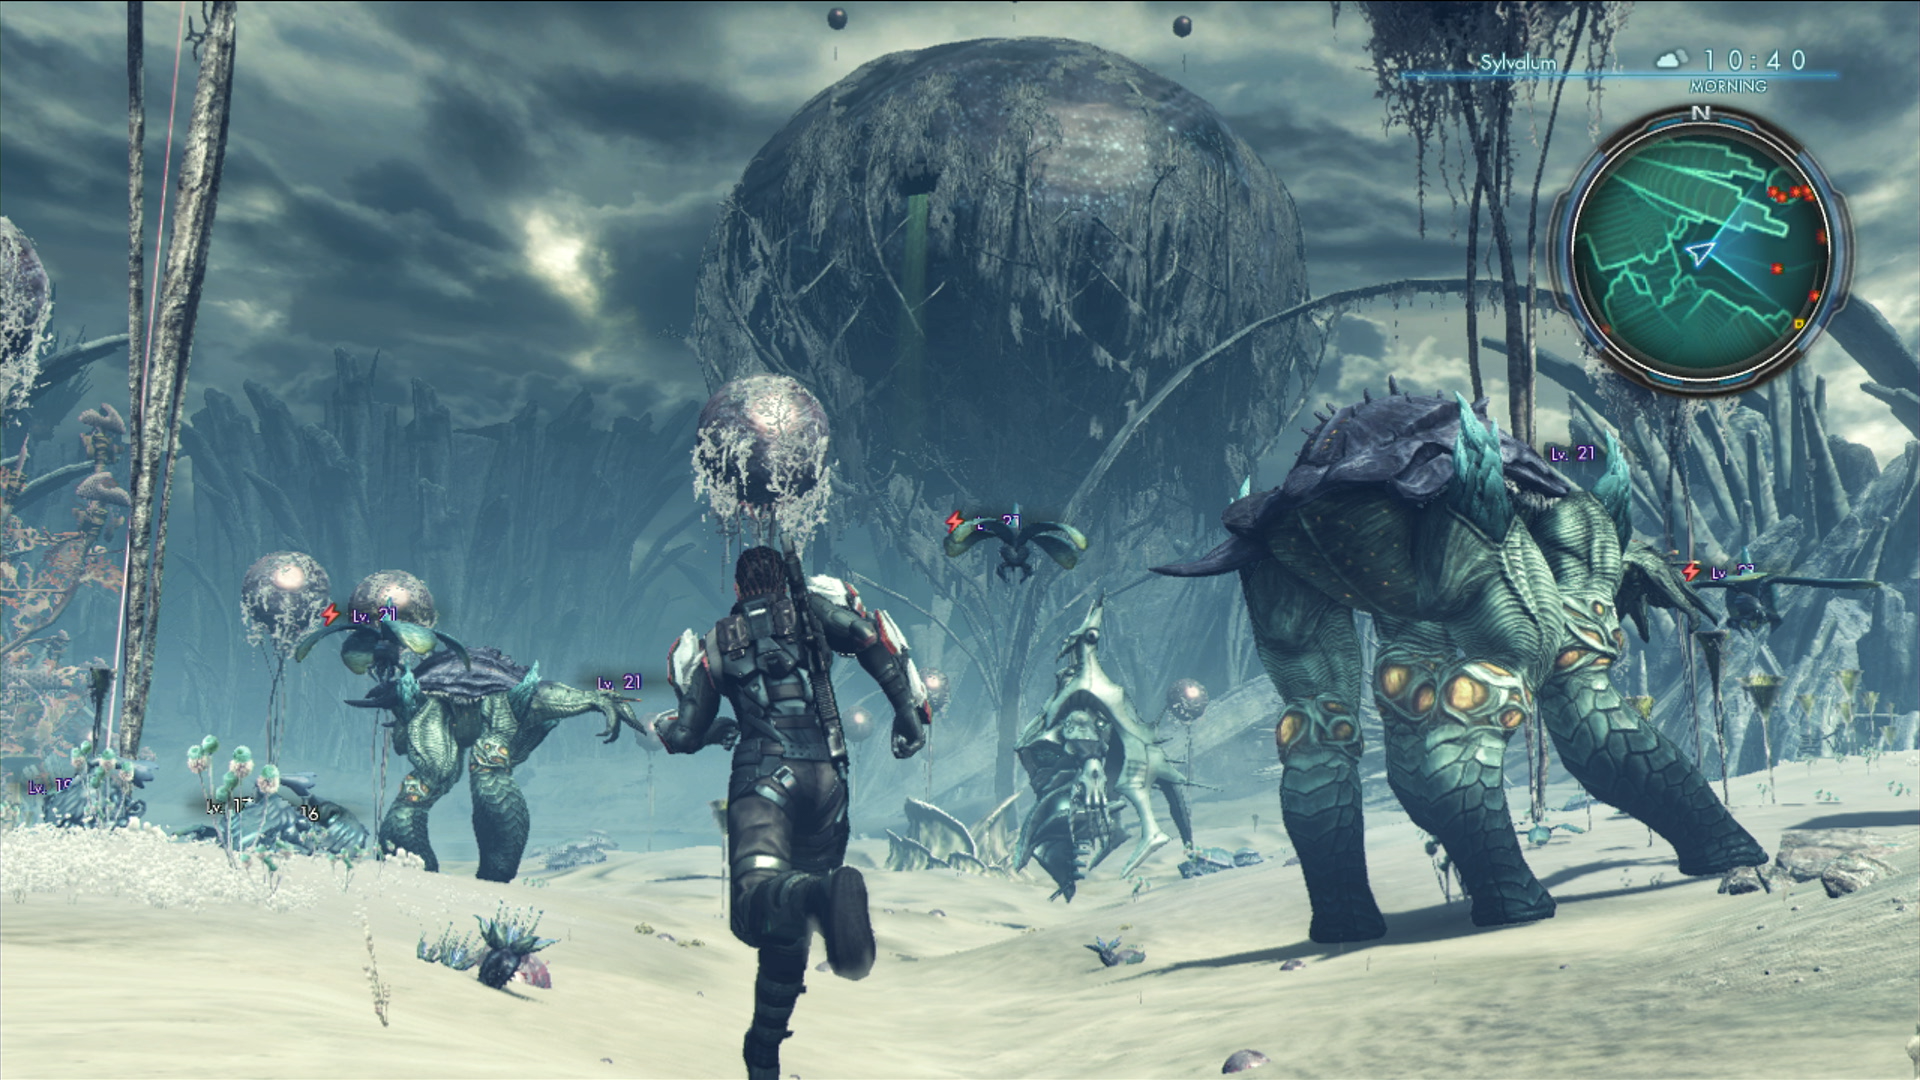 Xenoblade Chronicles X’s director on building an RPG for multiple audiences